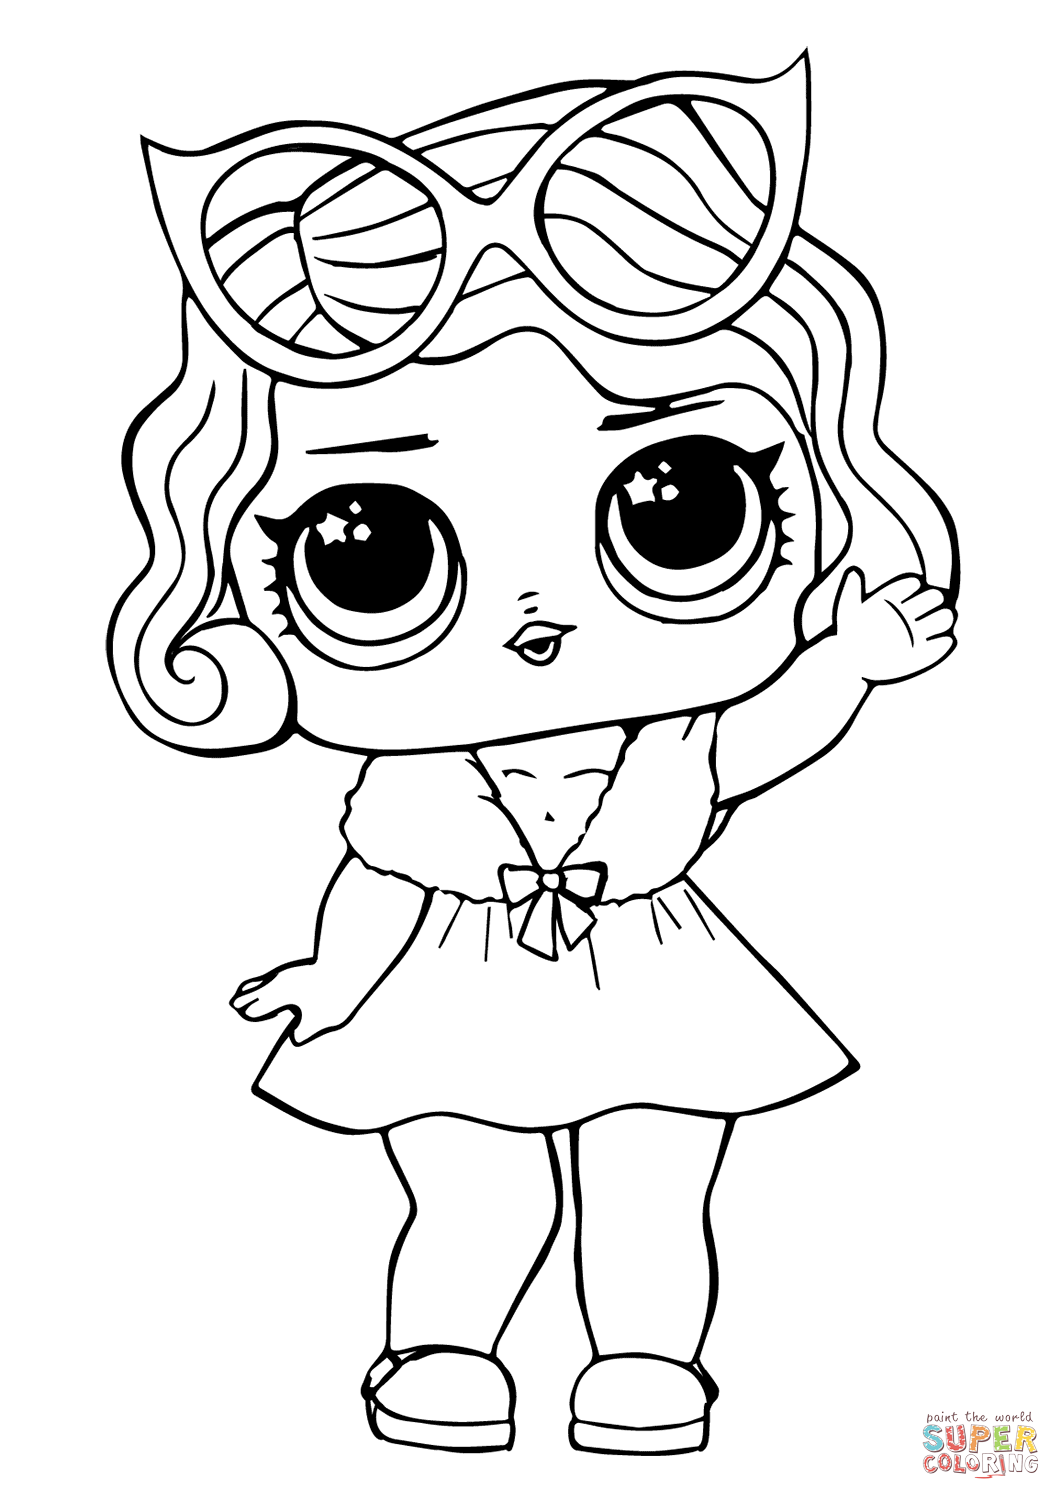 LOL Coloring Pages FREE Printable 44